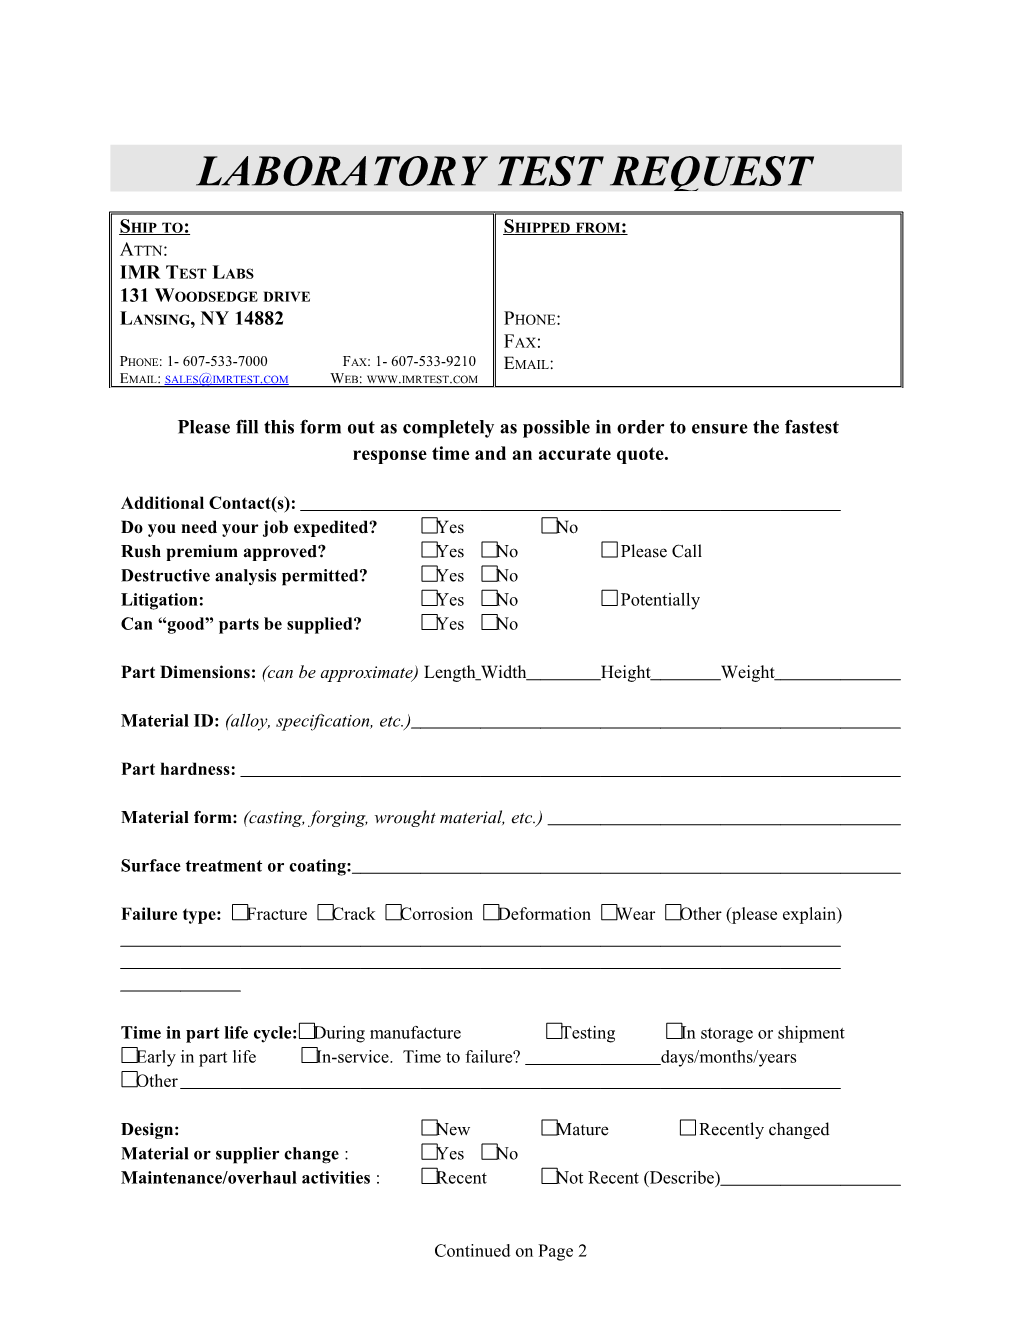 Please Fill This Form out As Completely As Possible in Order to Ensure the Fastest